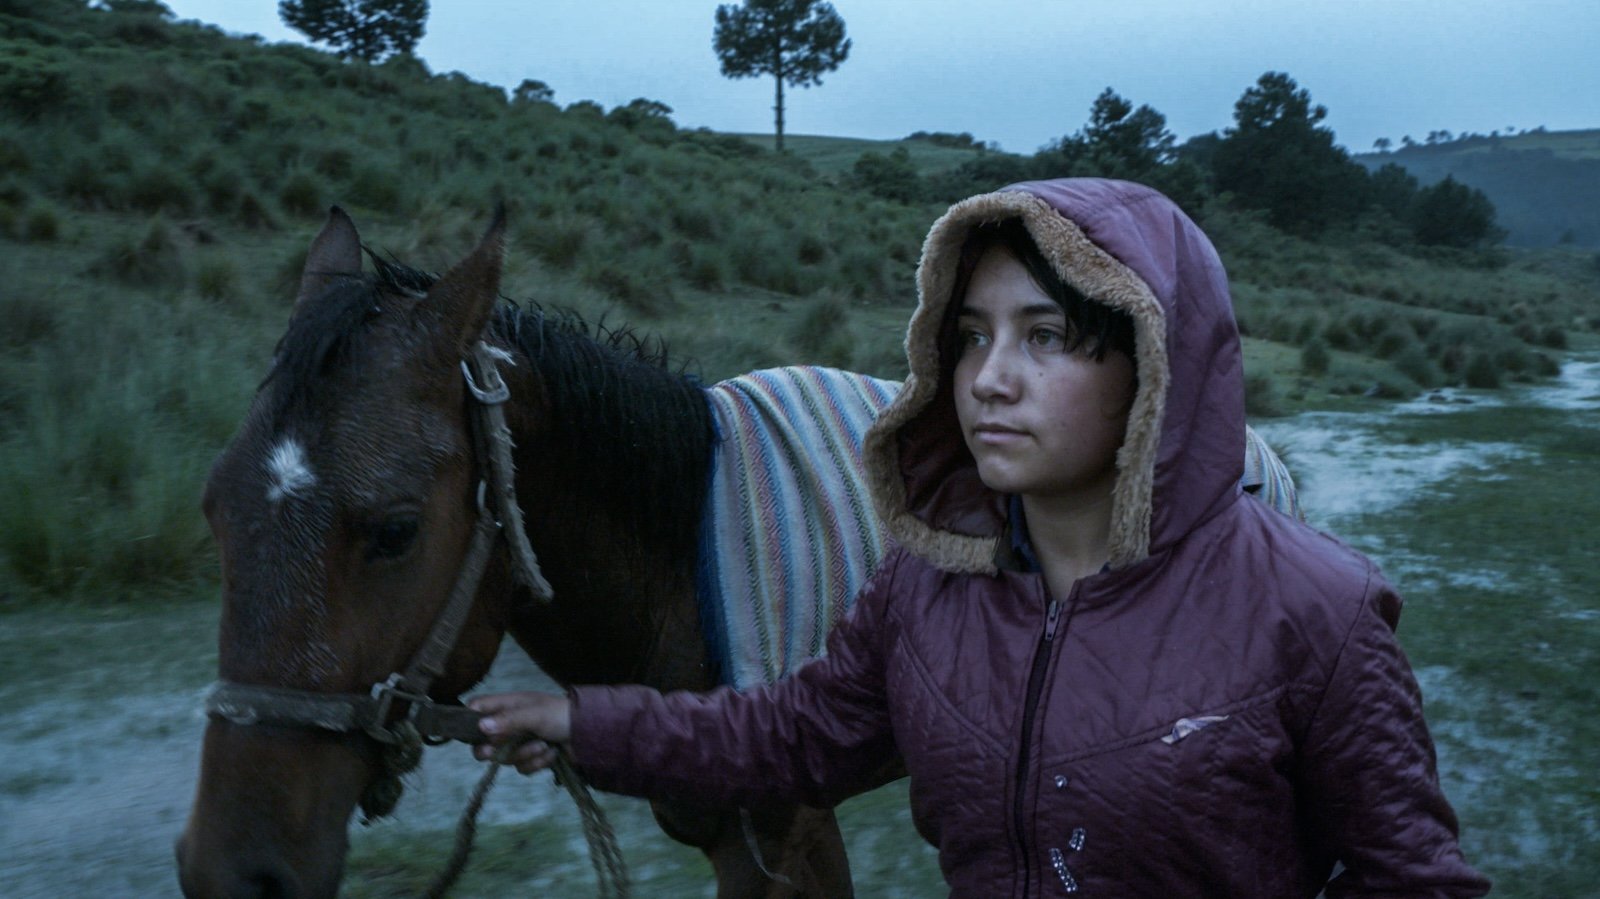 A young woman in a purple hooded coat leads a horse across a grassy terrain